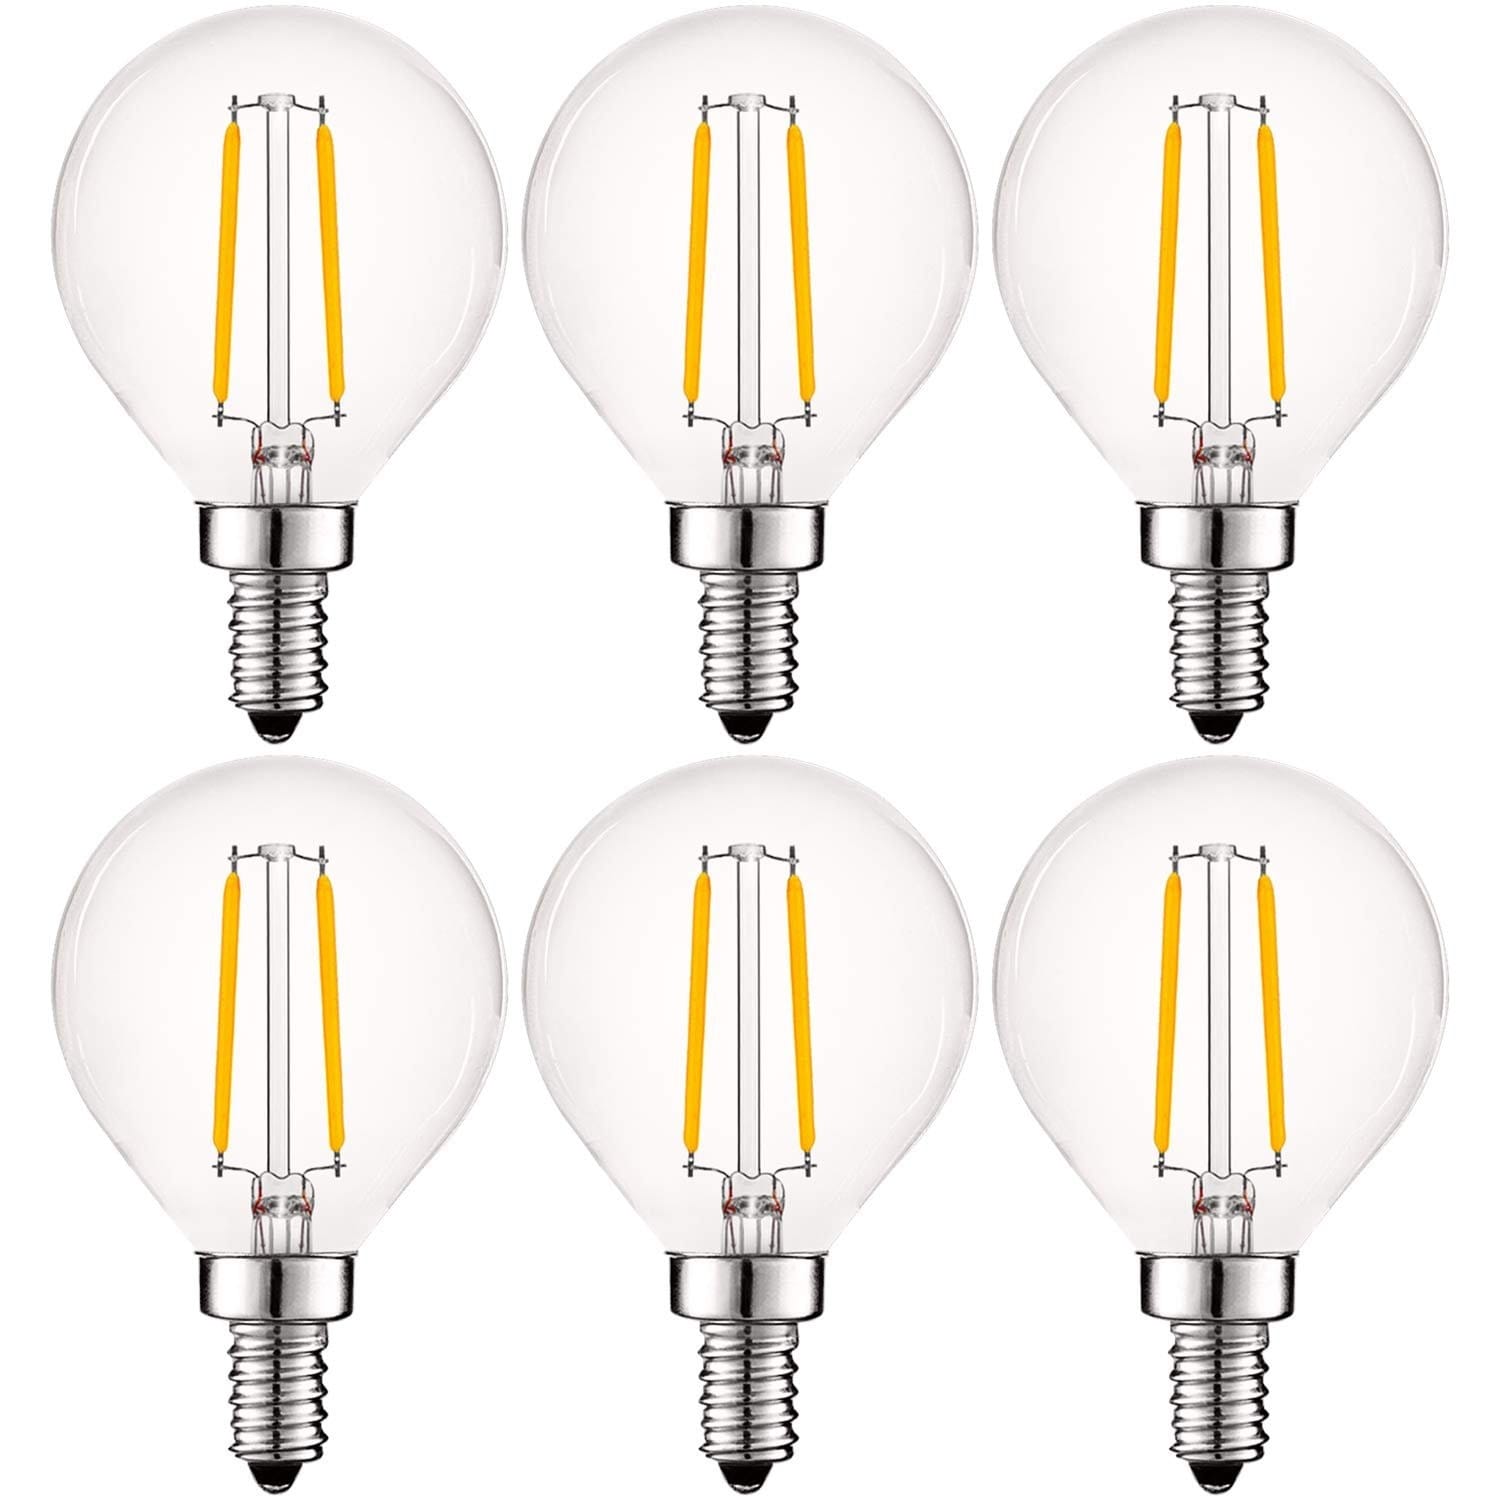 Dimmable 120VAC 2W to Replace 30W Incandescent Bulbs 2700K 5PACK Soft White Clear Bulb UL Certified E12 Base LED2020 LED G15.5 Globe Filament Light Bulb 